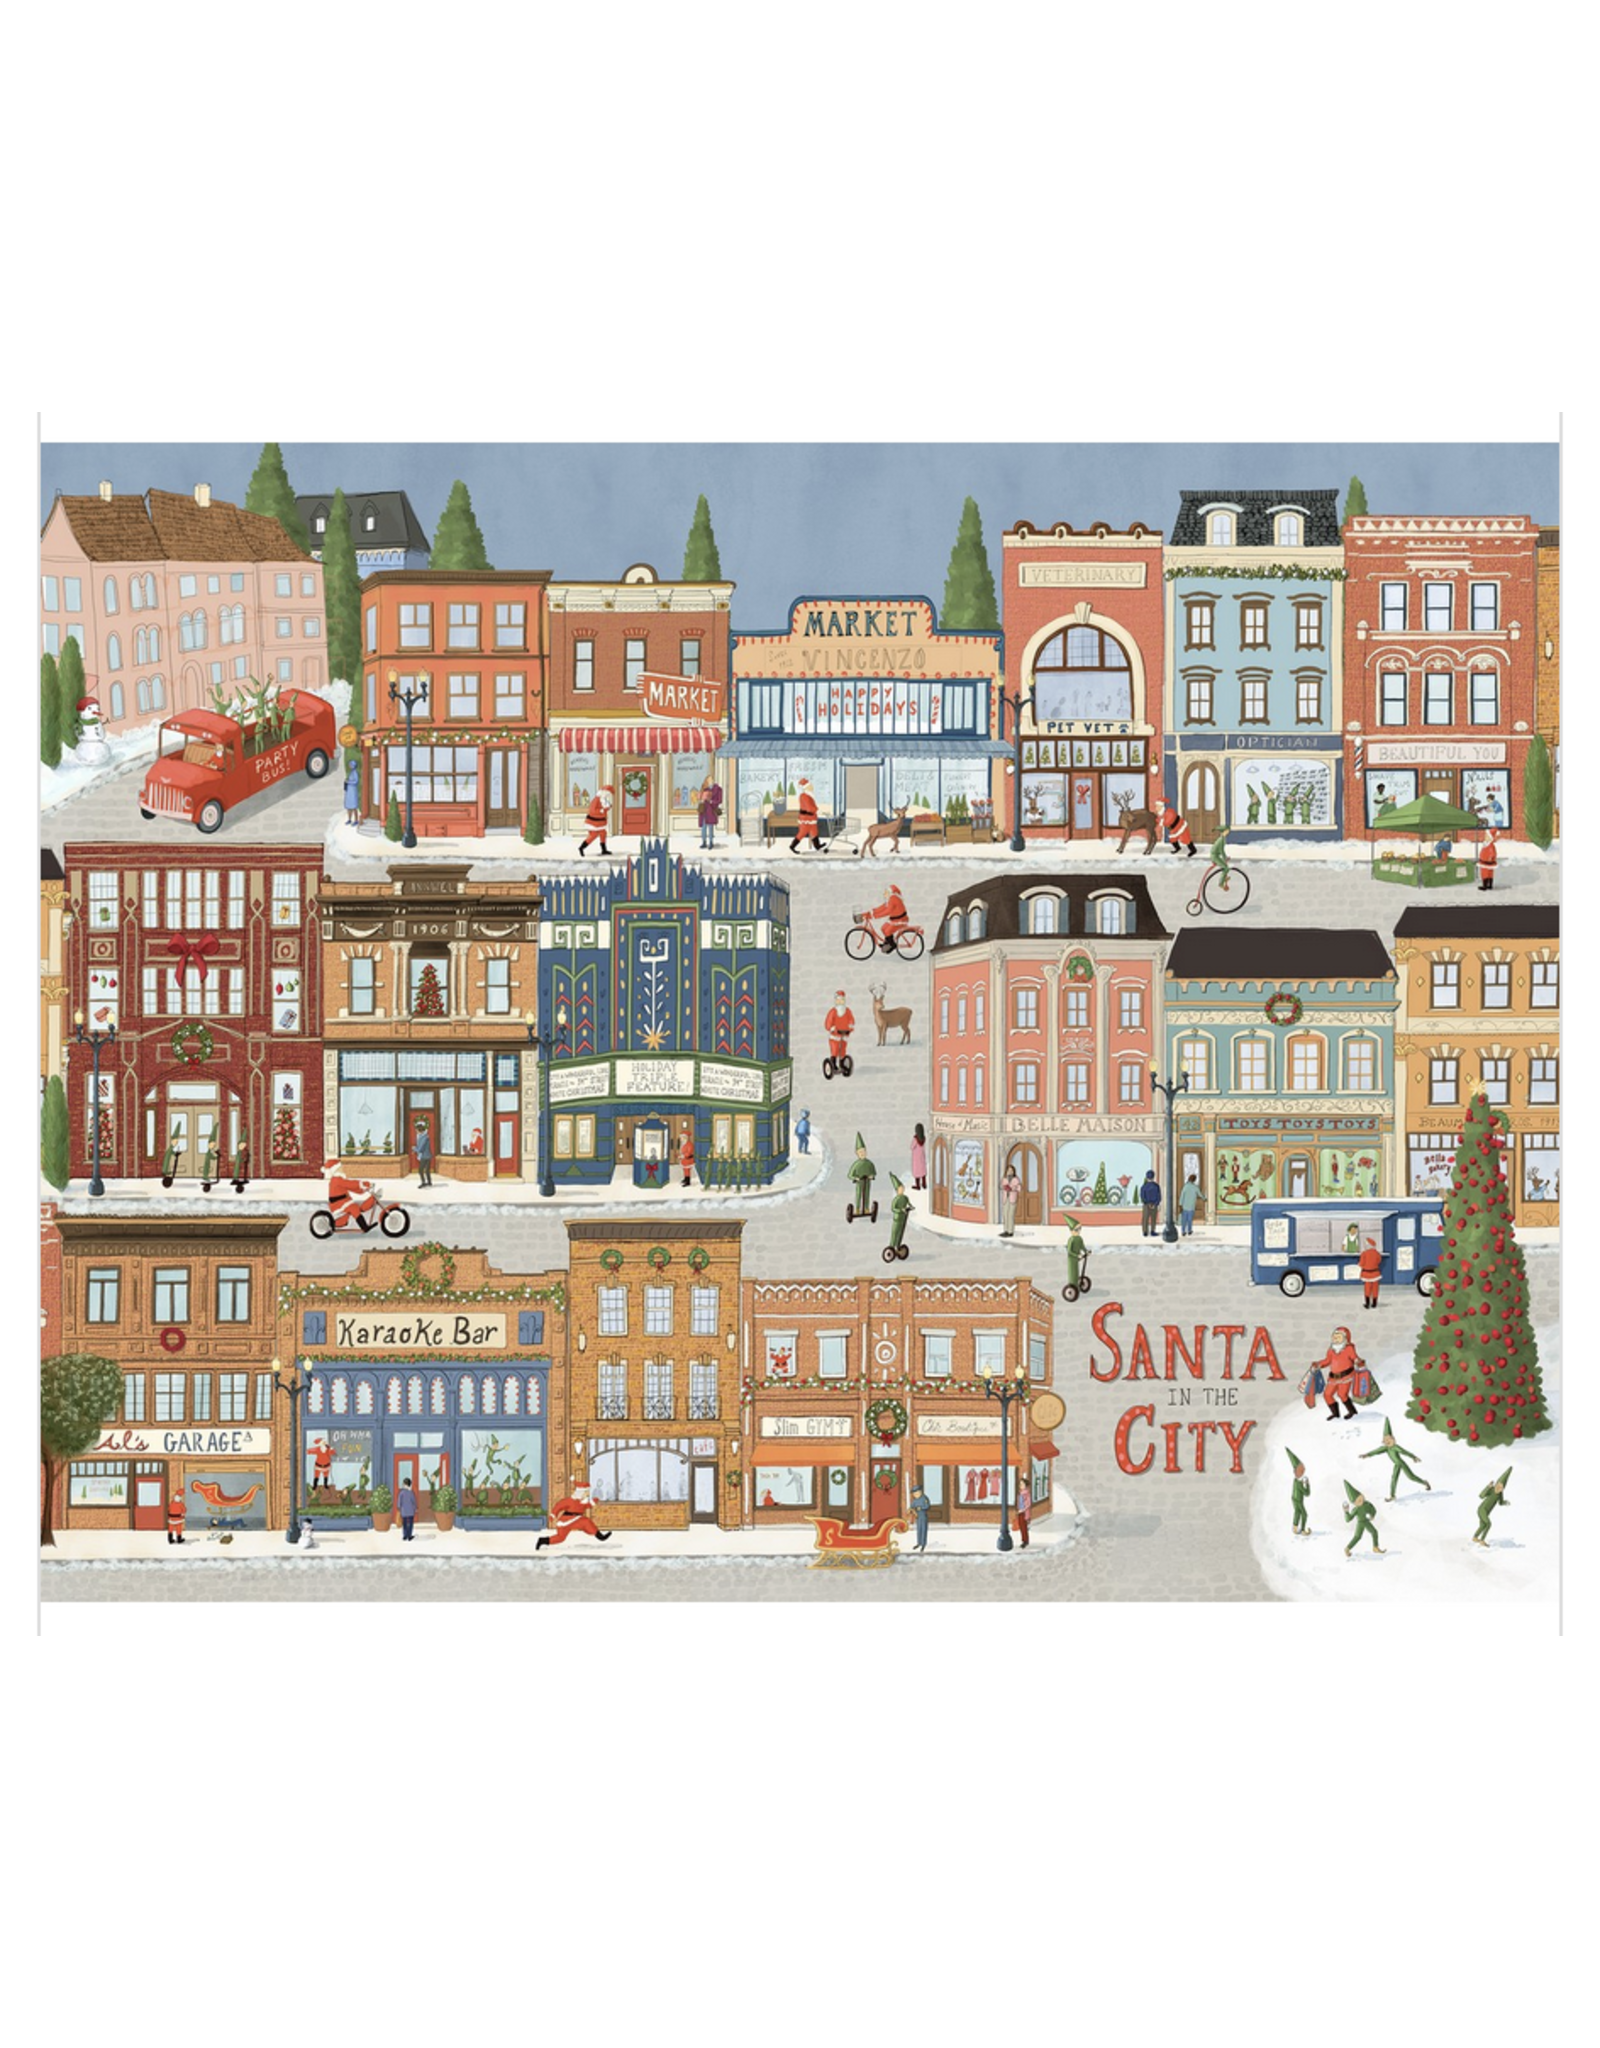 True South Santa in the City Puzzle